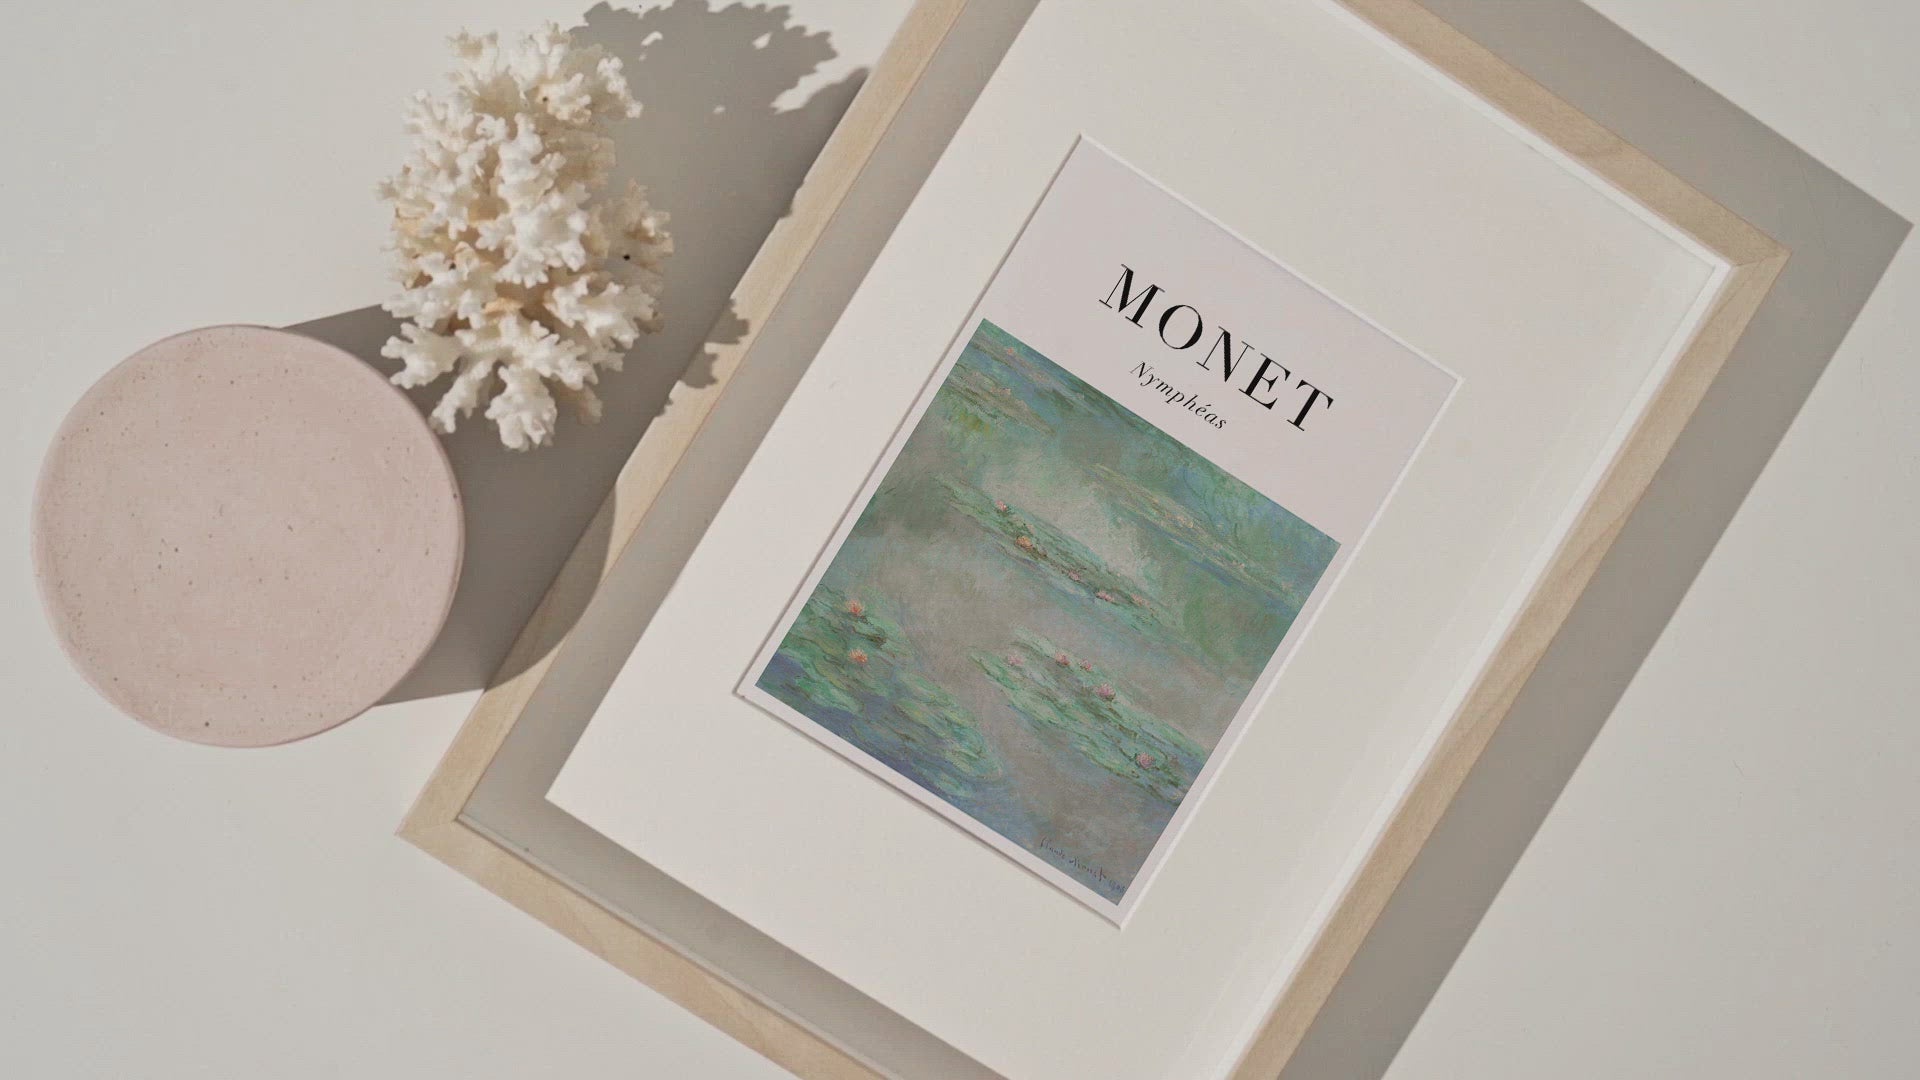 Monet painting of water lilies with the artist name and title of the work in black font.